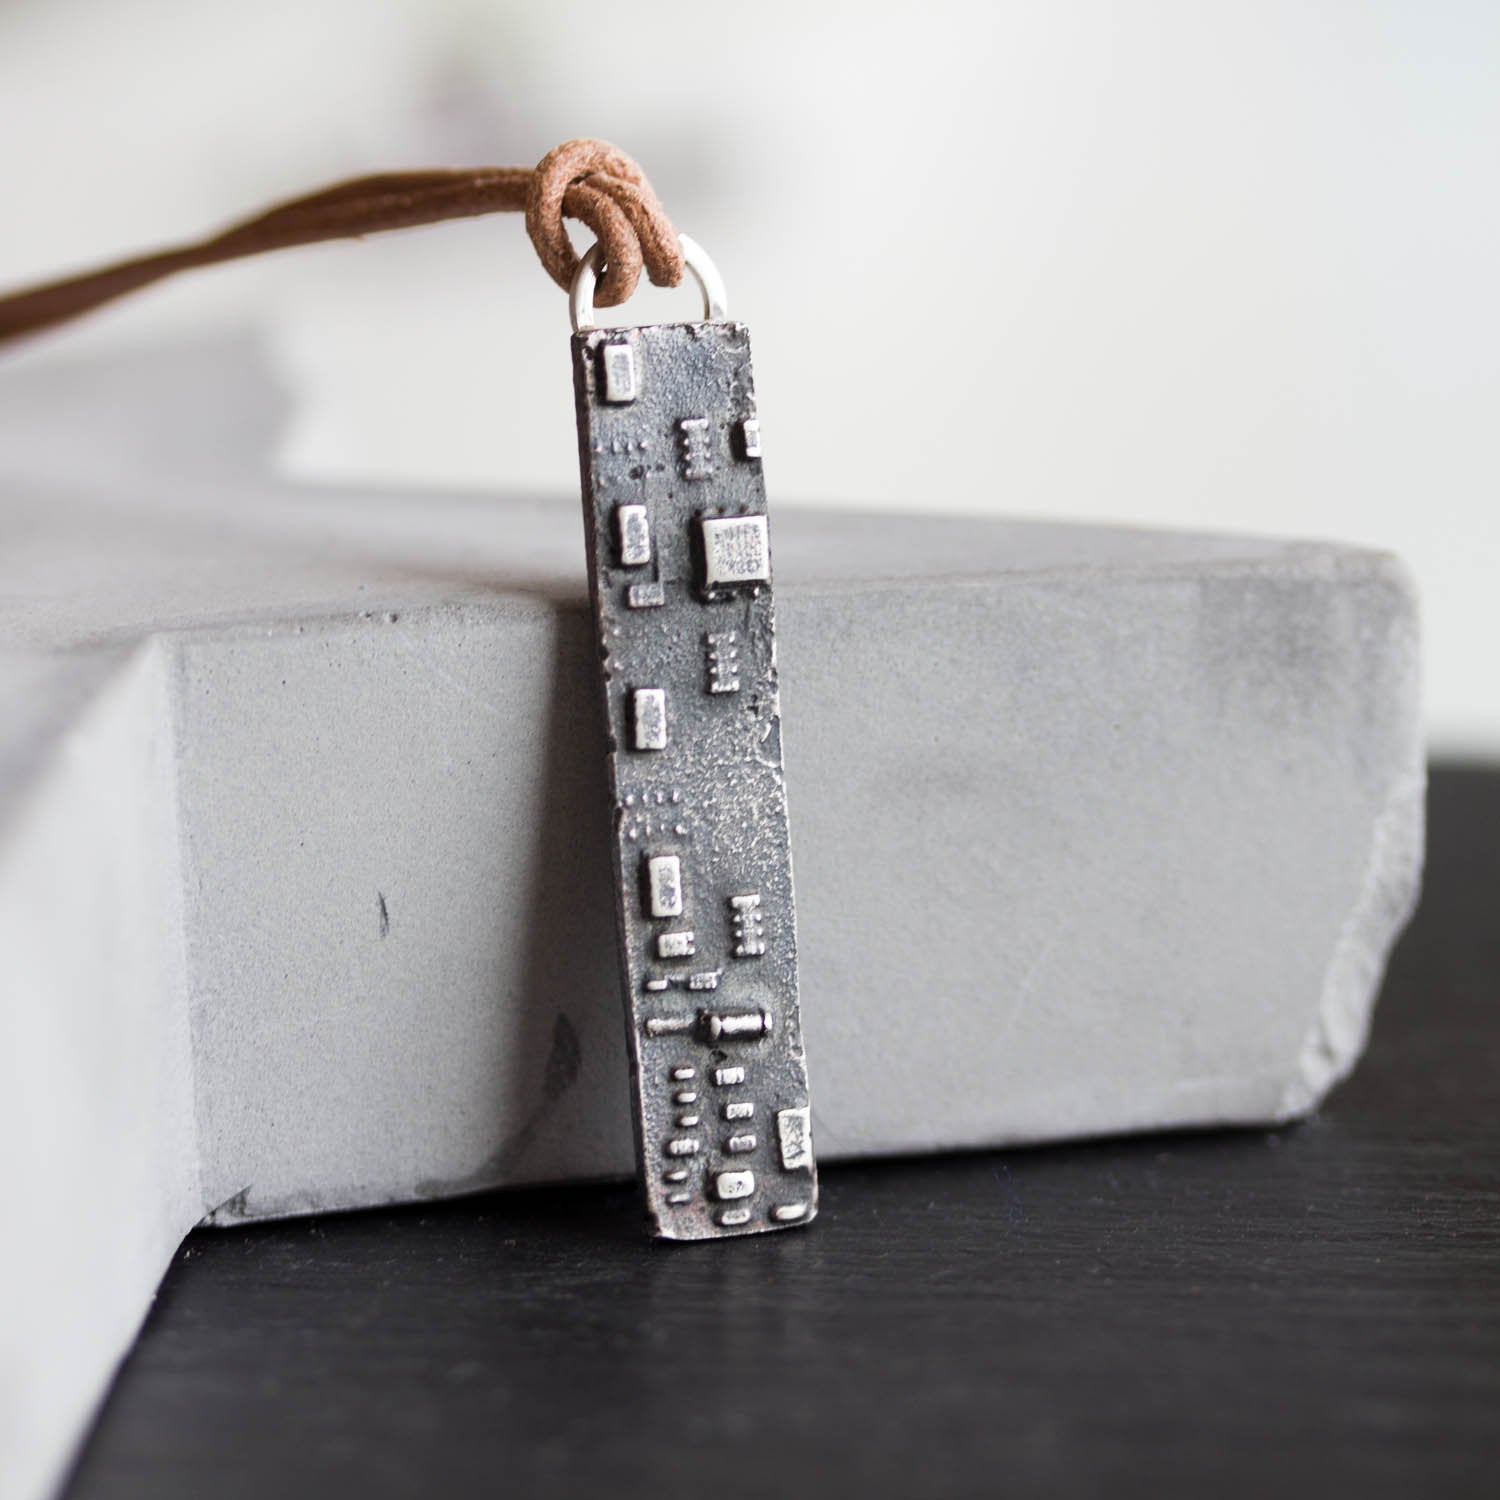 Melted circuit board necklace, argentium silver bar shaped as circuit board piece